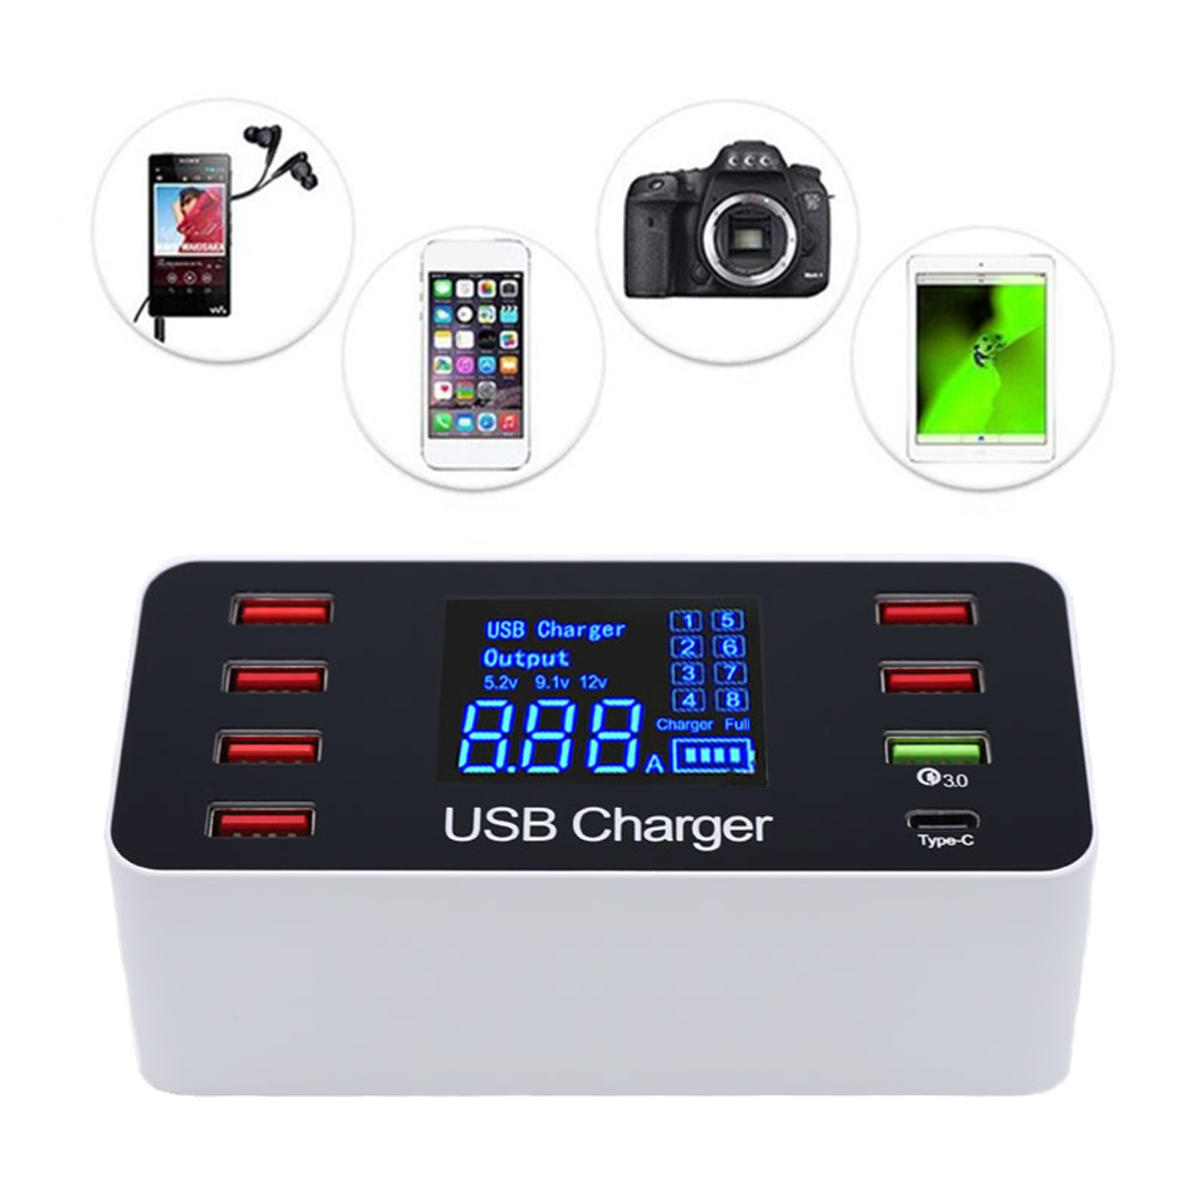 

5V/8A Multiple USB Charger Adapter Desktop Charging Station Hub Type C Quick Charge 3.0 Multi Port LCD Display Mobile Ph